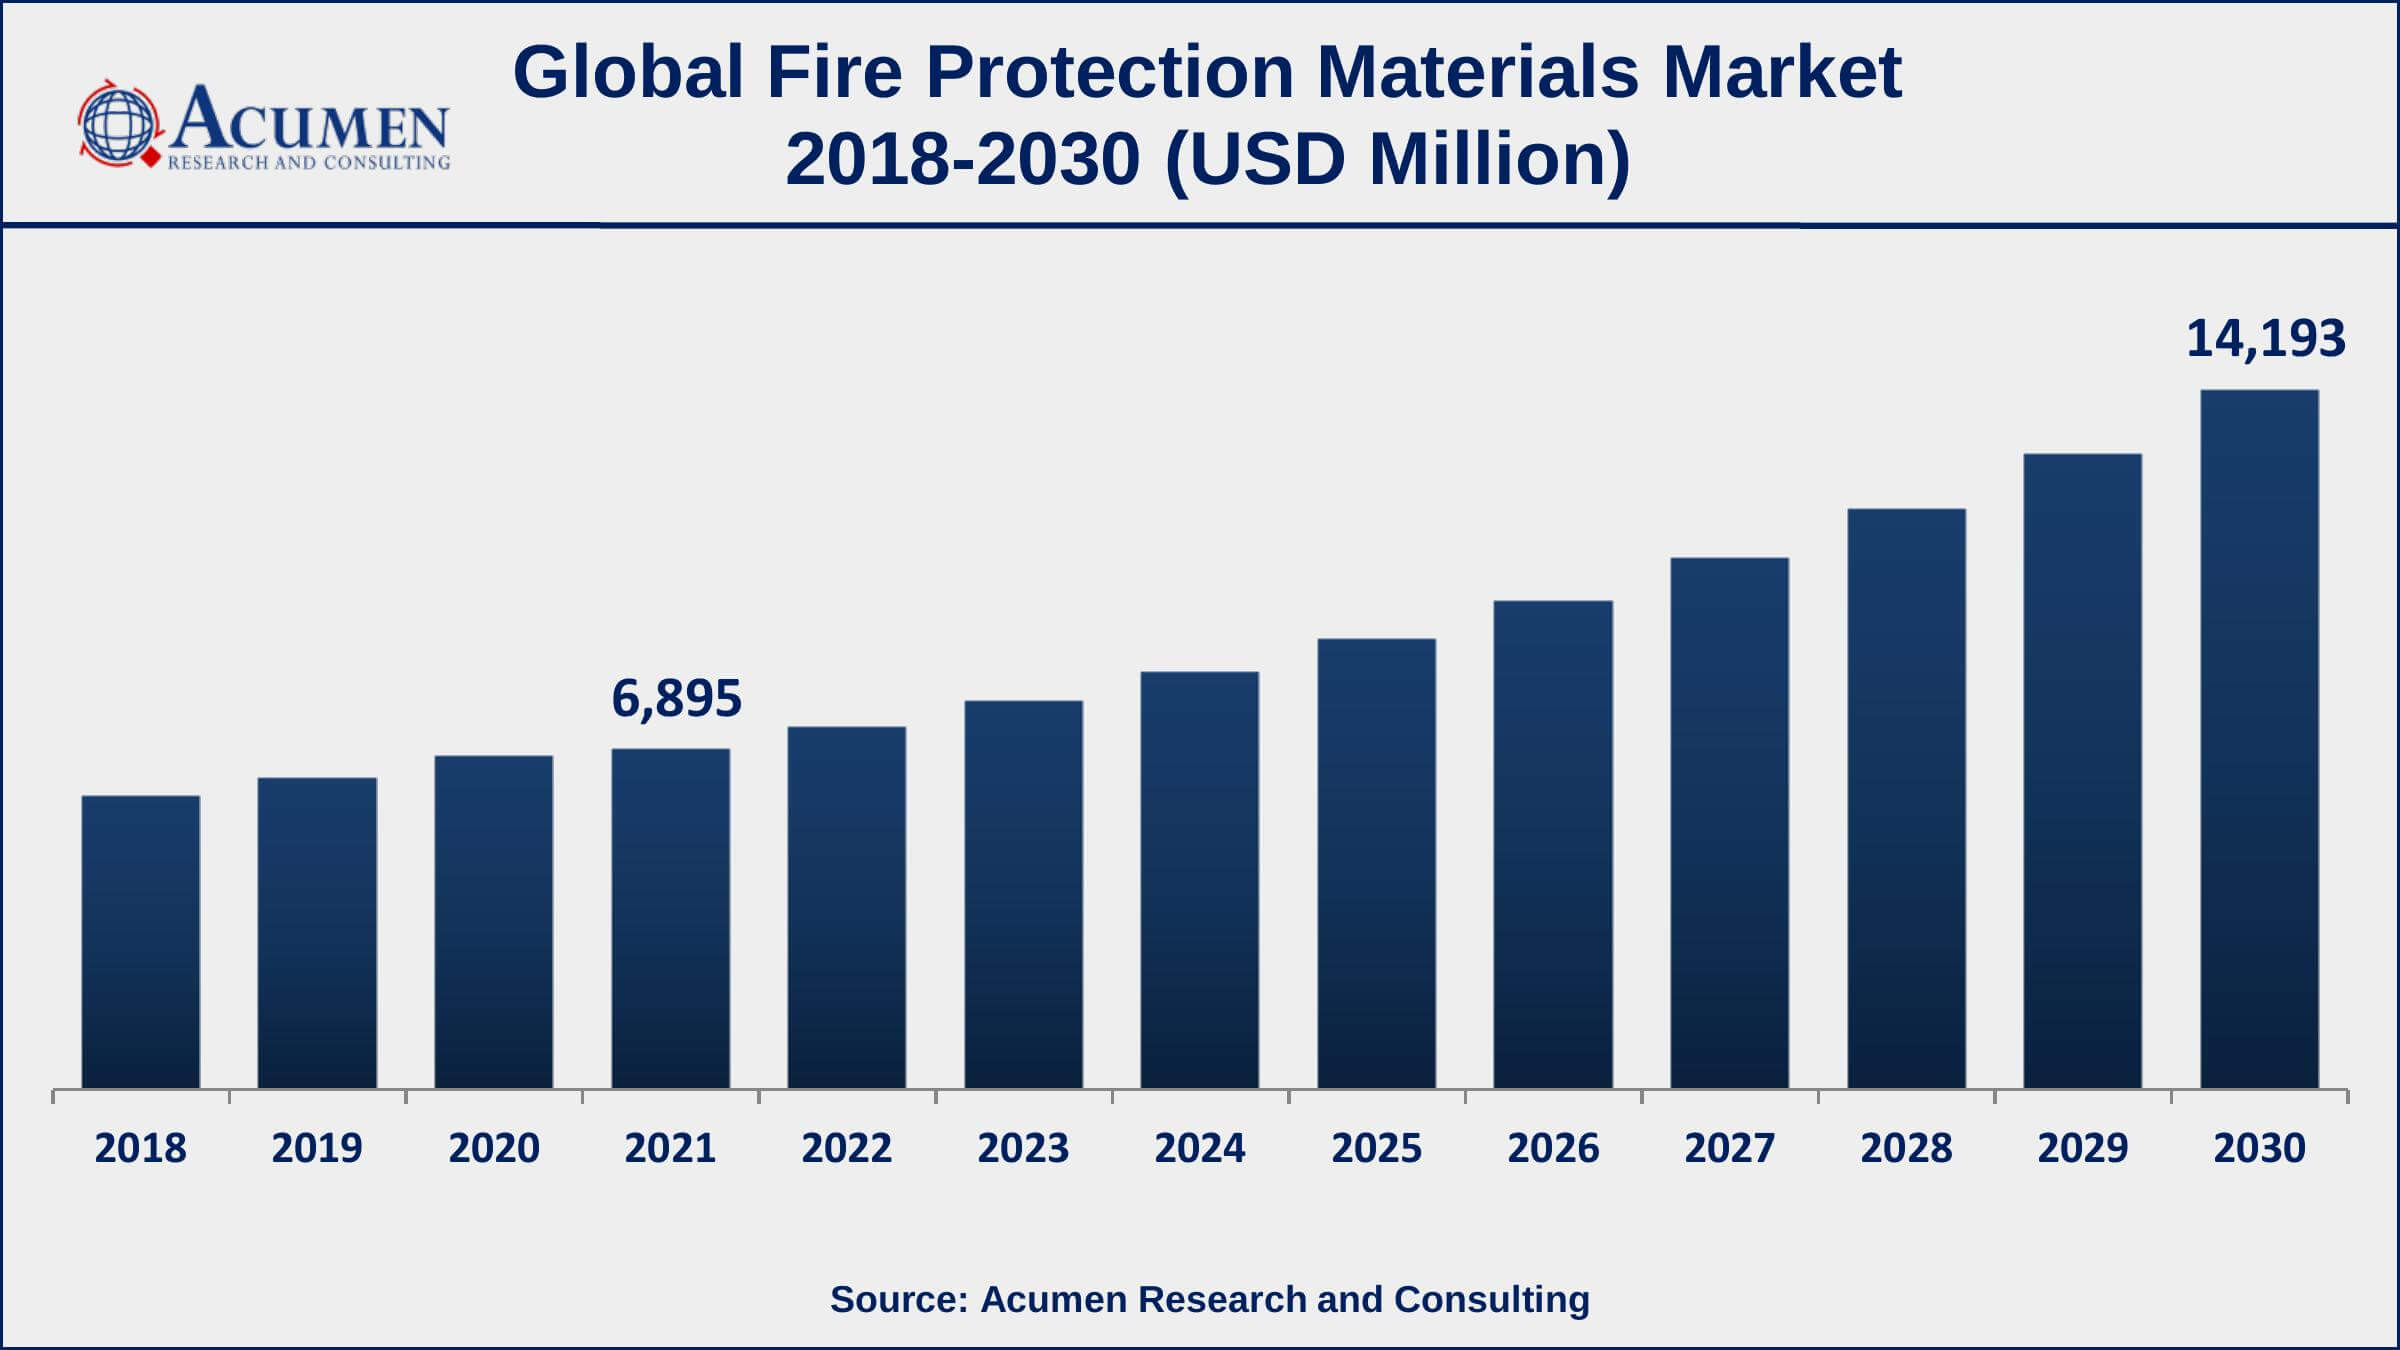 North America fire protection materials market share accounted for over 33% of total market shares in 2021